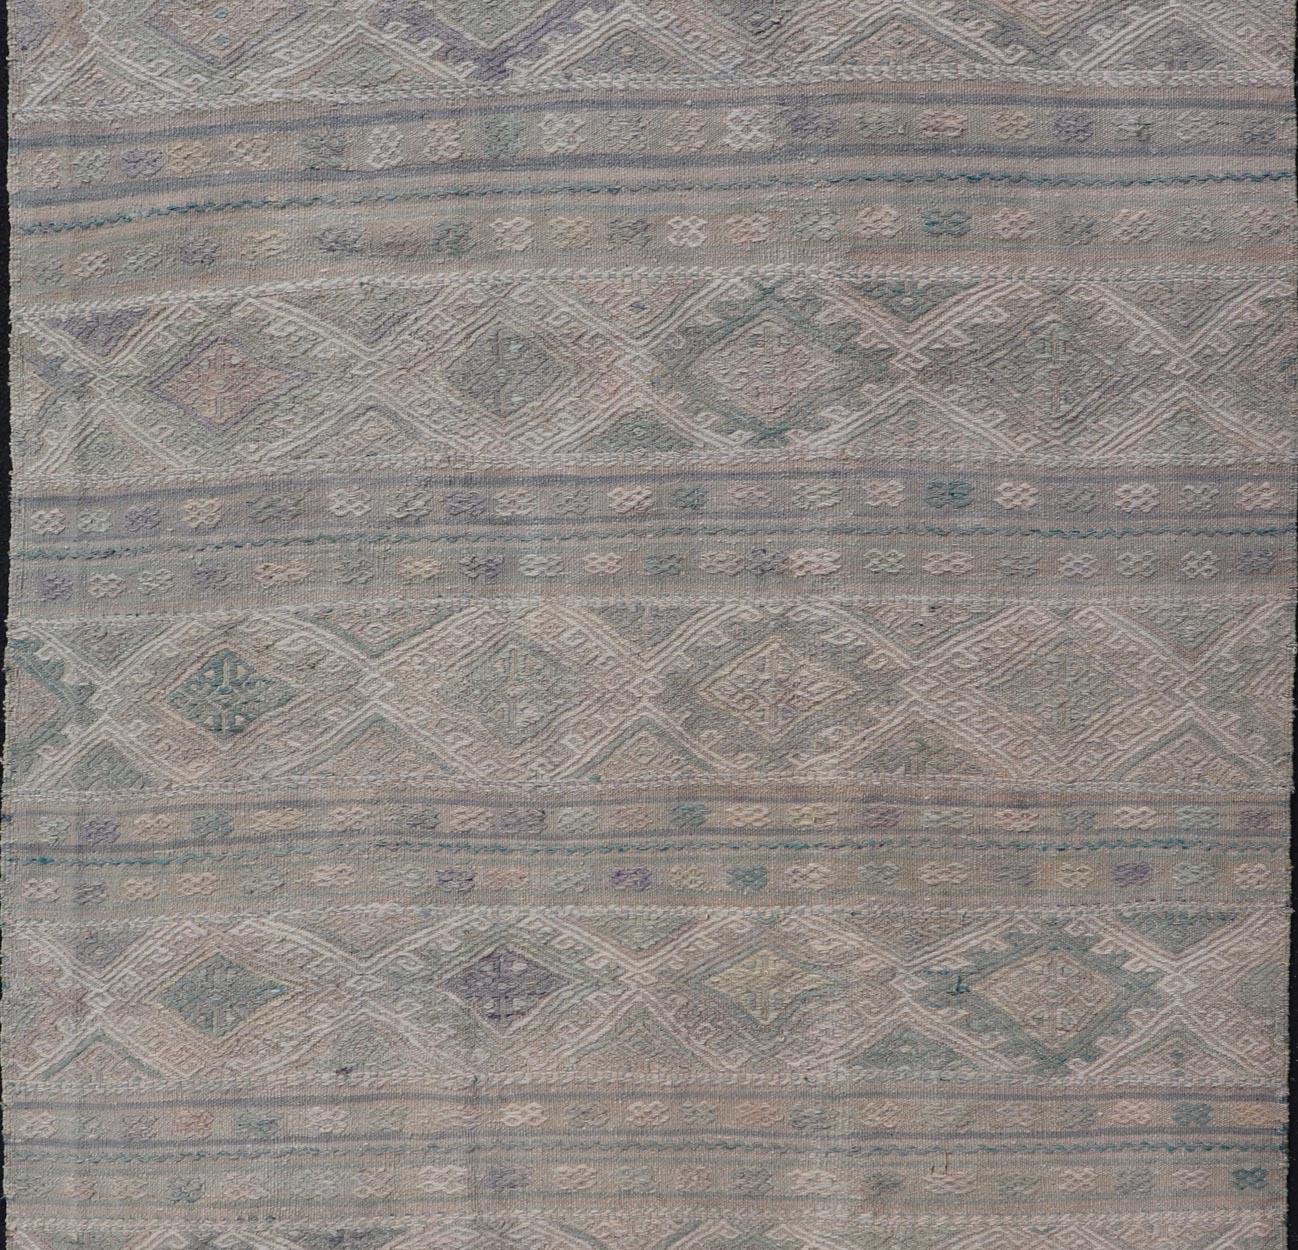 Vintage Turkish Flat-Weave Kilim with Stripes and Embroideries With Gray-Green For Sale 4